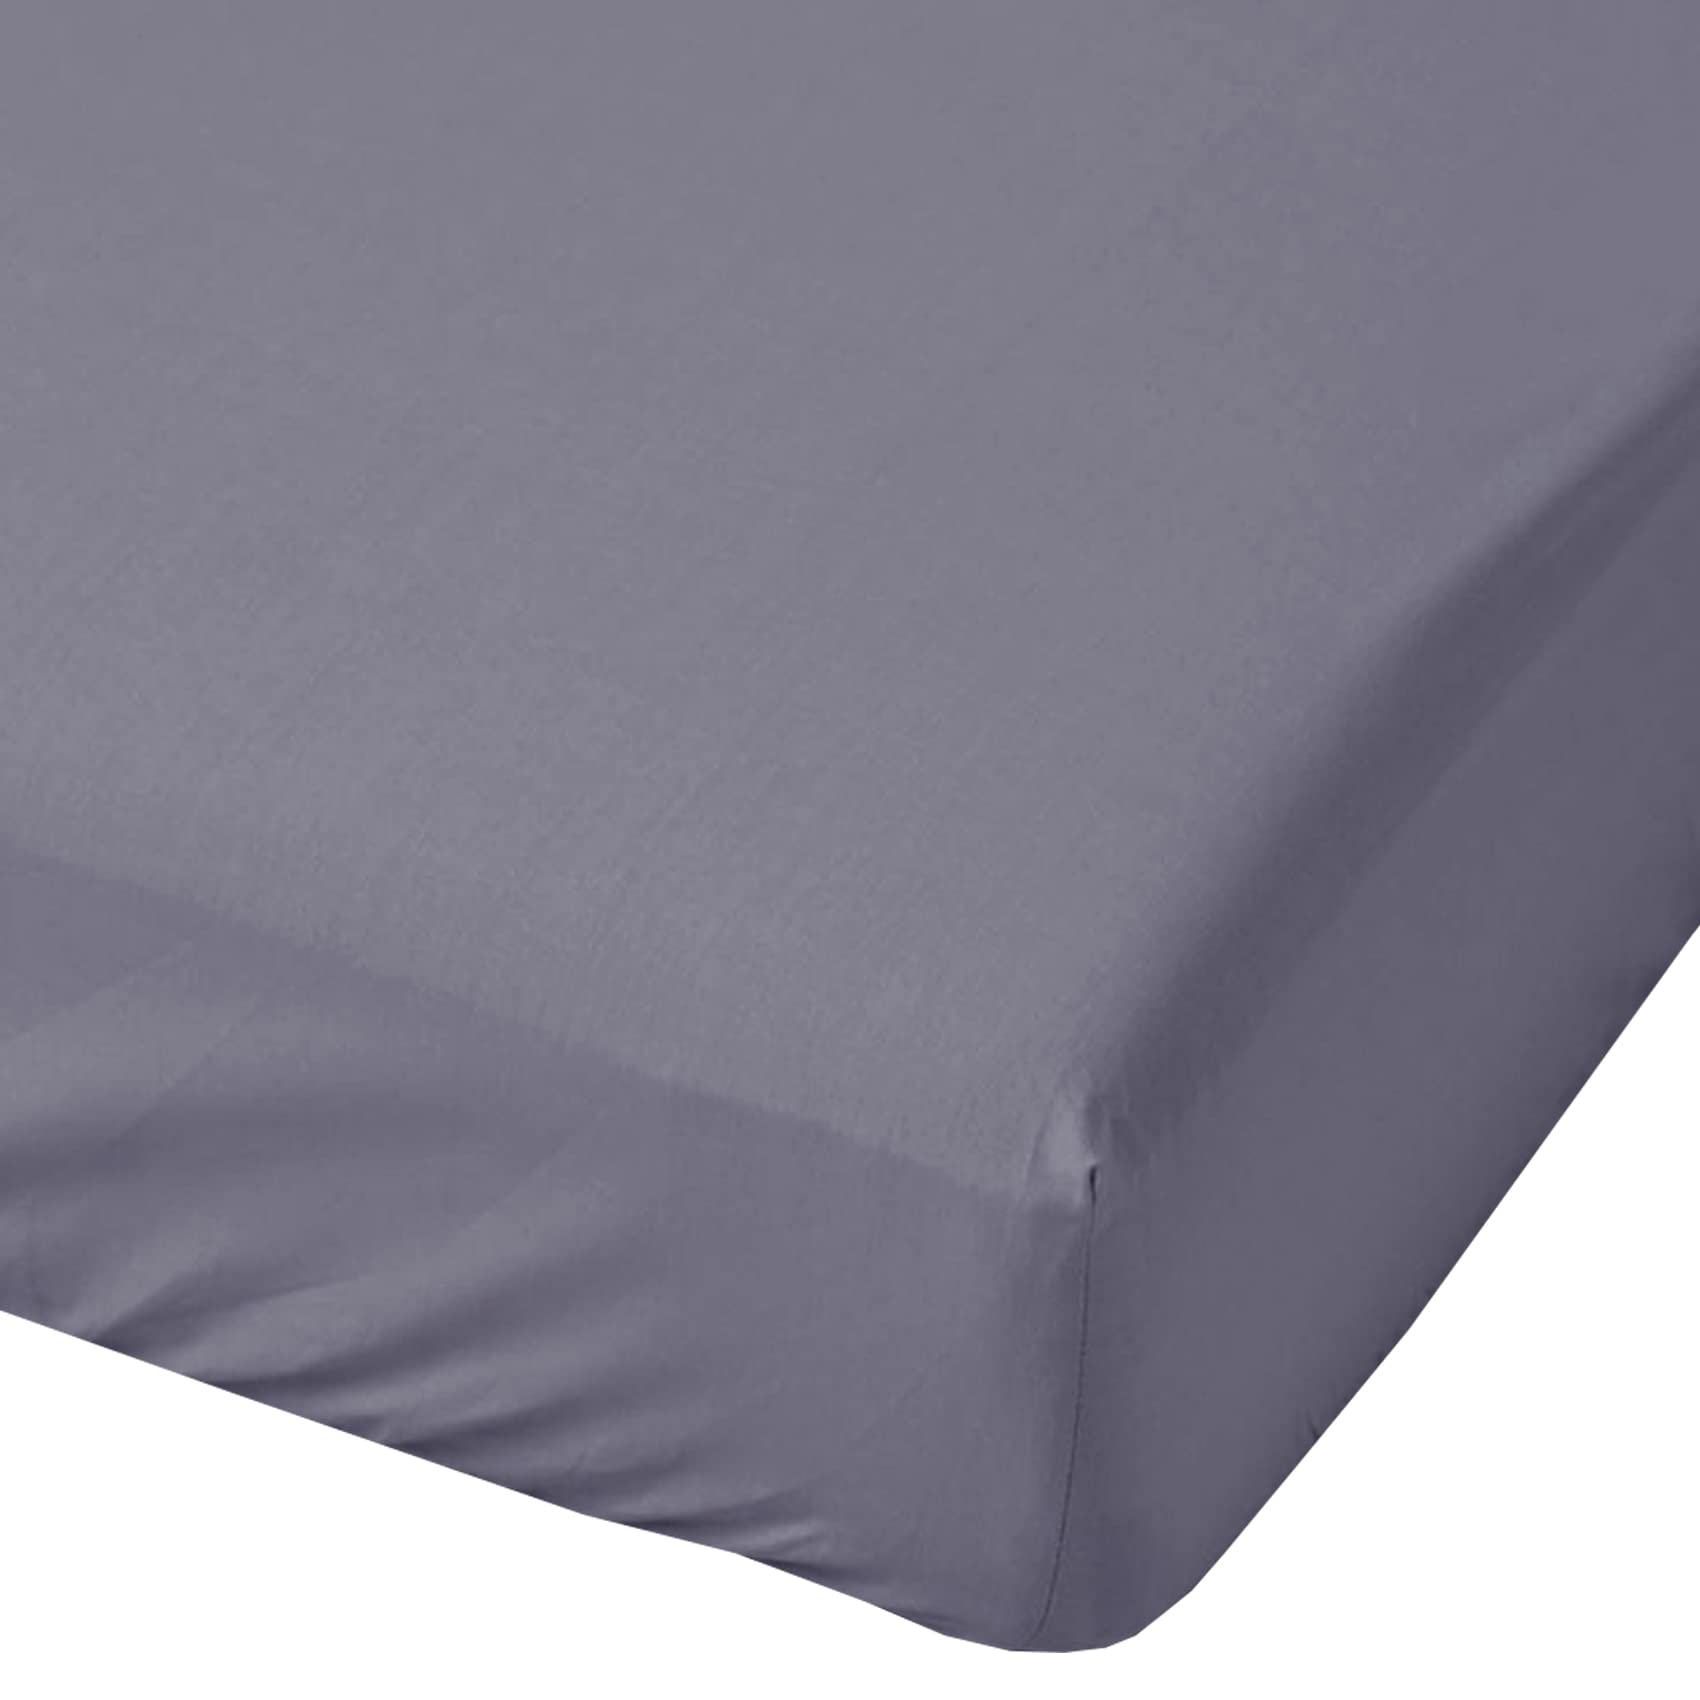 Homely Ideas 4FT / Small Double 40 cm/16" Extra Deep Fitted Sheets Plain Dyed 100% Poly cotton Easy Iron Bedding & Linen. (GREY, 4 FT SMALL DOUBLE)